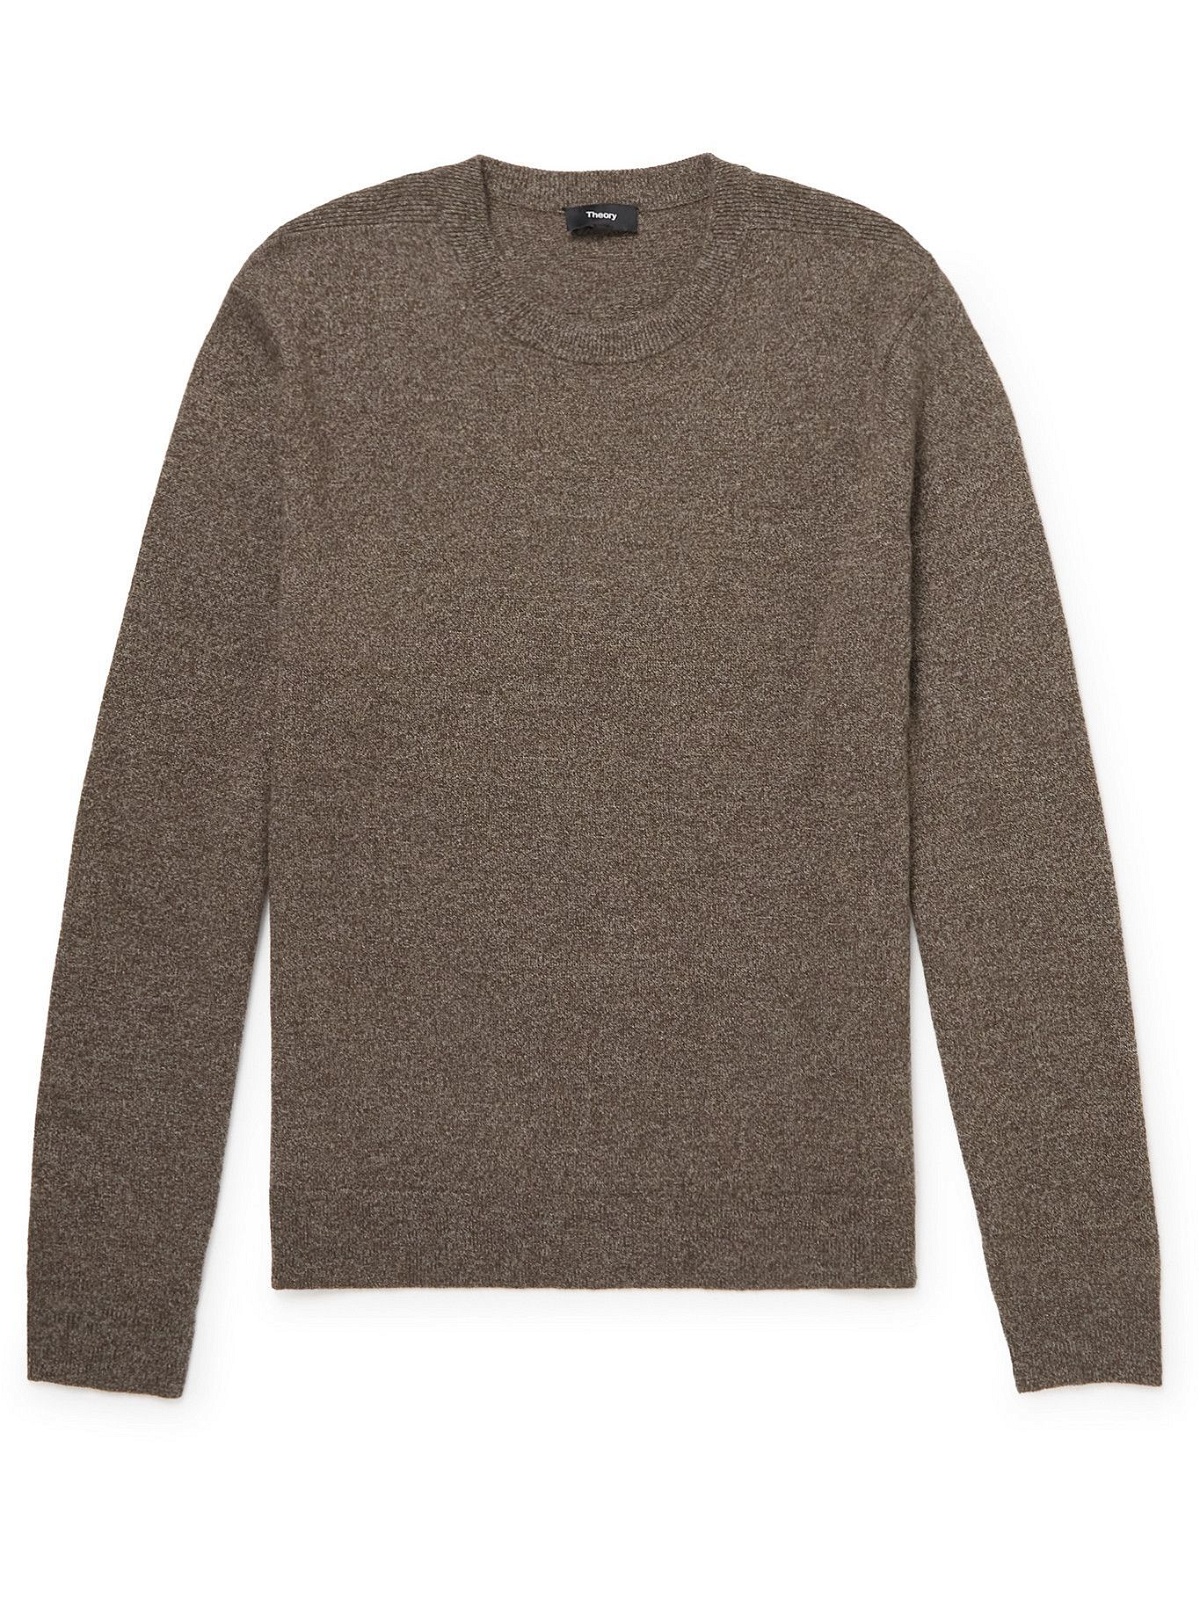 Theory - Cashmere Sweater - Brown Theory